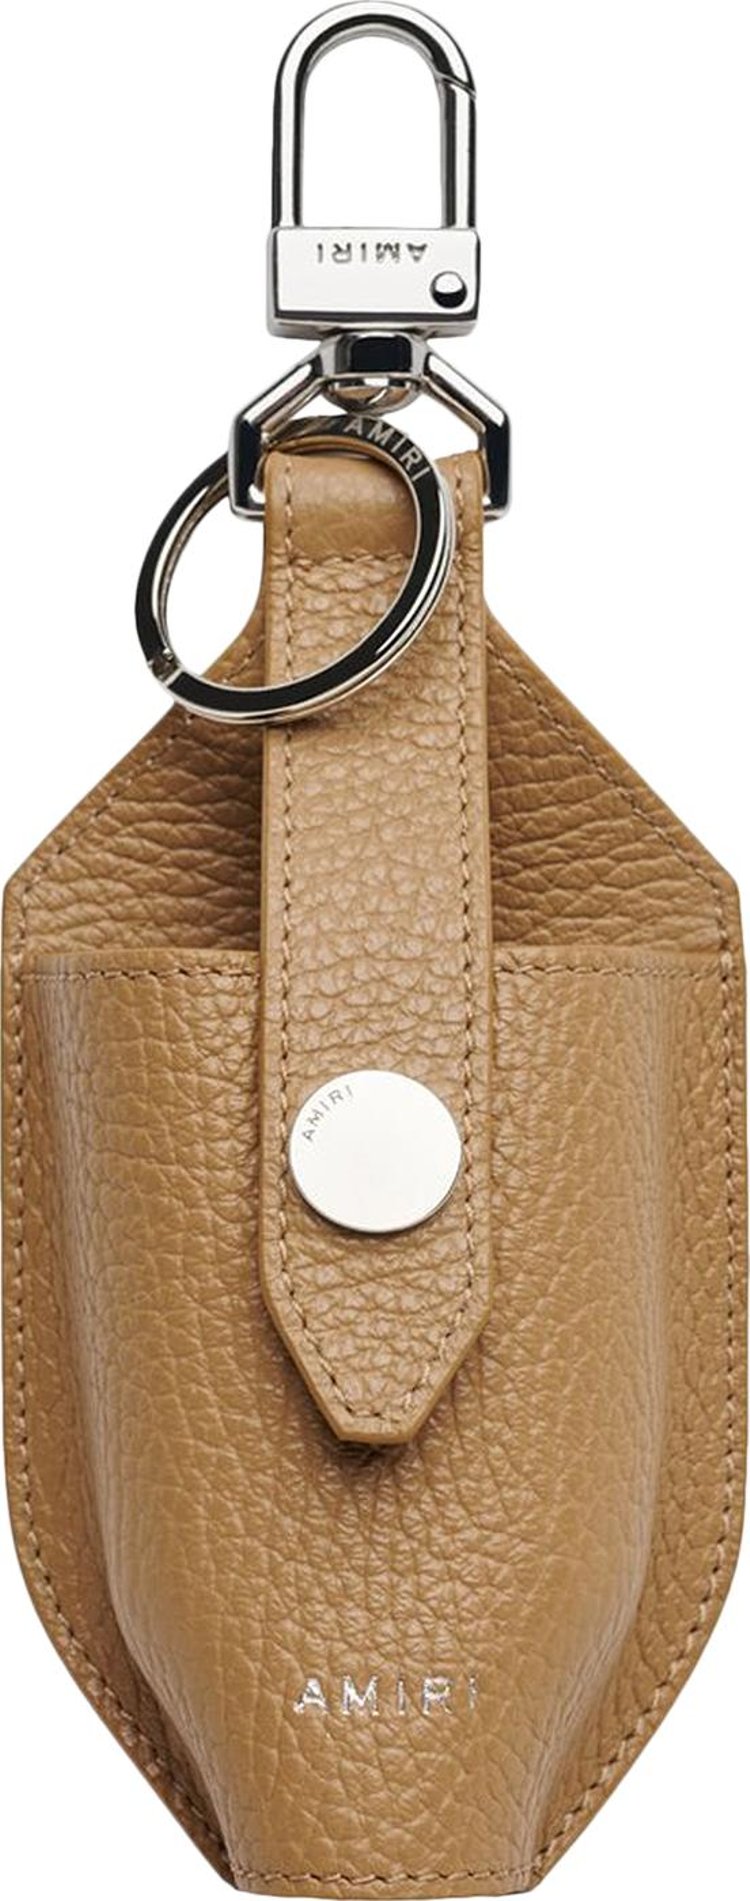 Amiri Leather Hand Sanitizer Pouch 'Oatmeal'